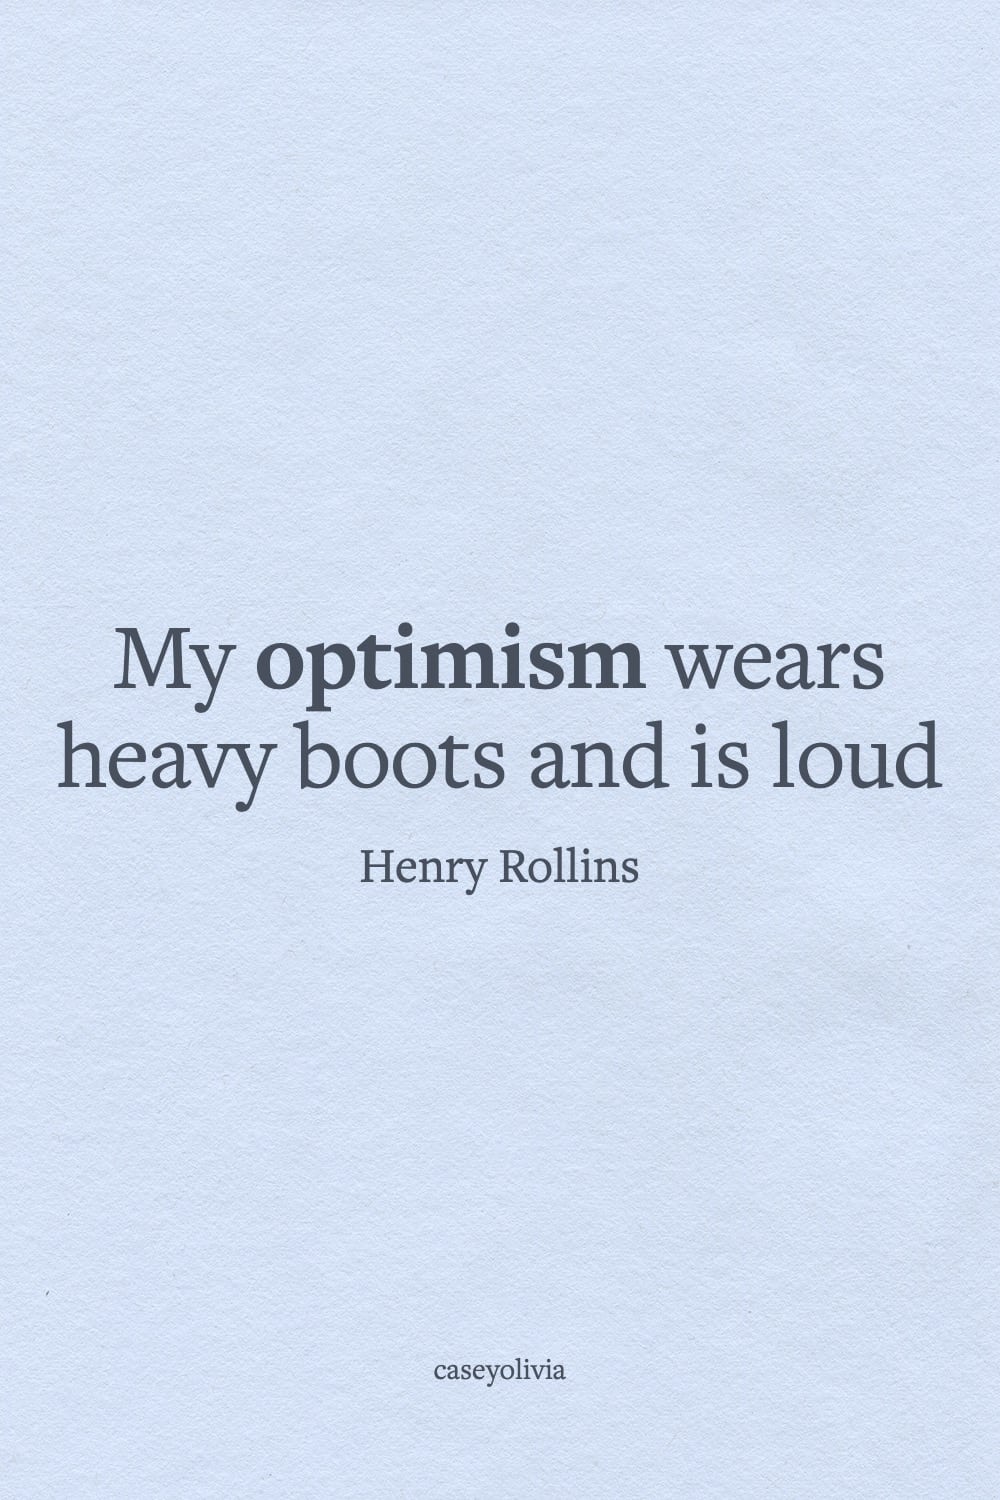 henry rollins optimistic quote about hard work